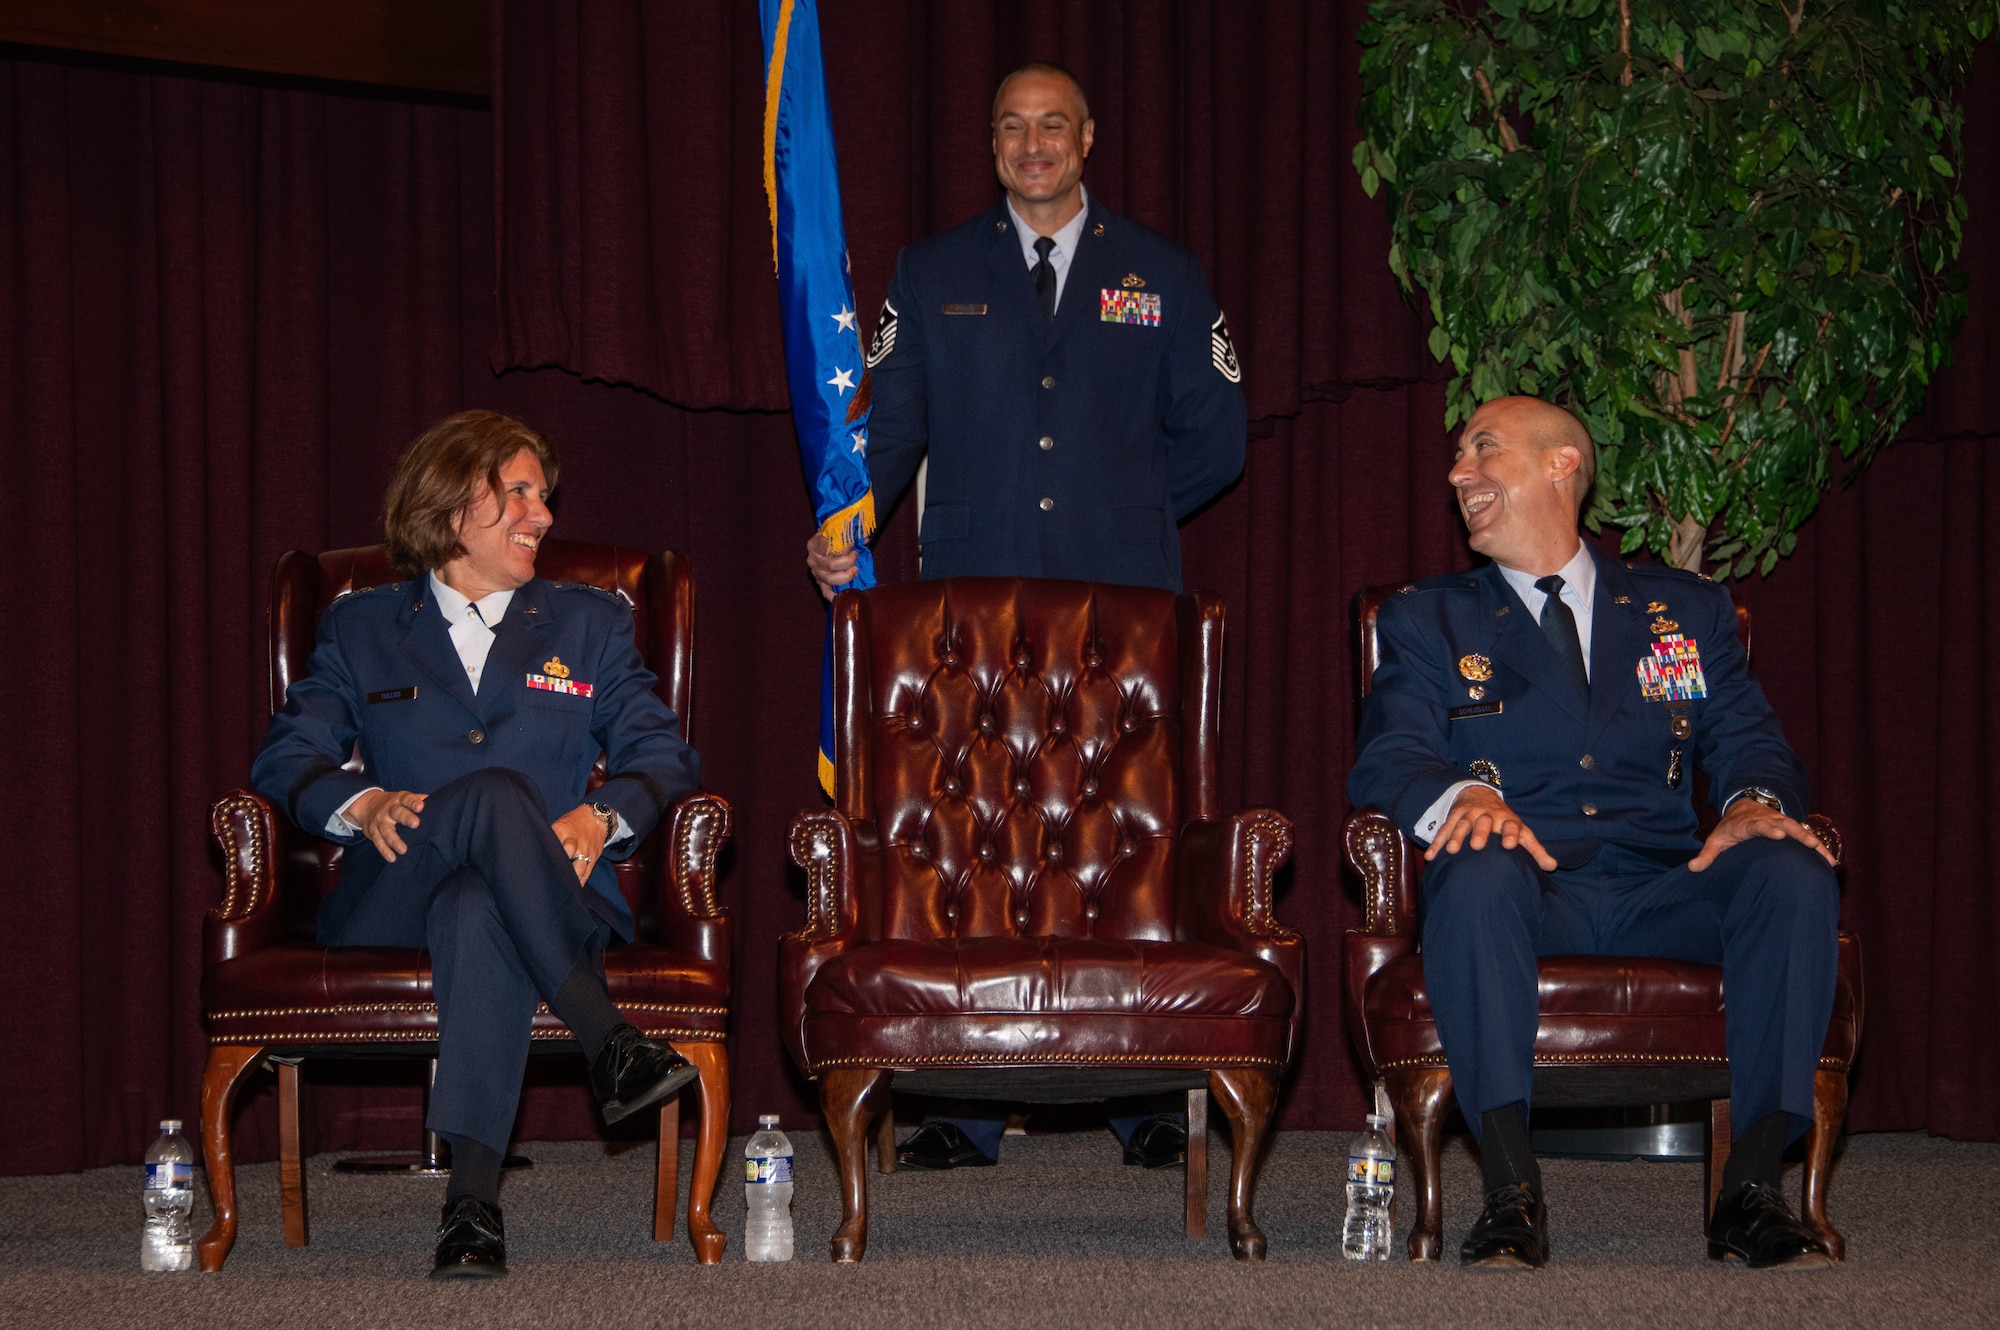 Left to right, Lt. Gen. Andrea D. Tullo, Master Sgt. William Jenkins and Col. Damian Schlussel laugh at a joke made by Col. Anthony D. Babcock as he gives his final remarks as commander before relinquishing command of the Thomas N. Barnes Center for Enlisted Education to Schlussel during a change of command ceremony at the Senior Noncommissioned Officer Academy on Maxwell Air Force Base - Gunter Annex, June 28, 2023. Tullos is the Air University commander and president, and Jenkins is the Barnes Center first sergeant.  (U.S. Air Force photo/Brian Ferguson)